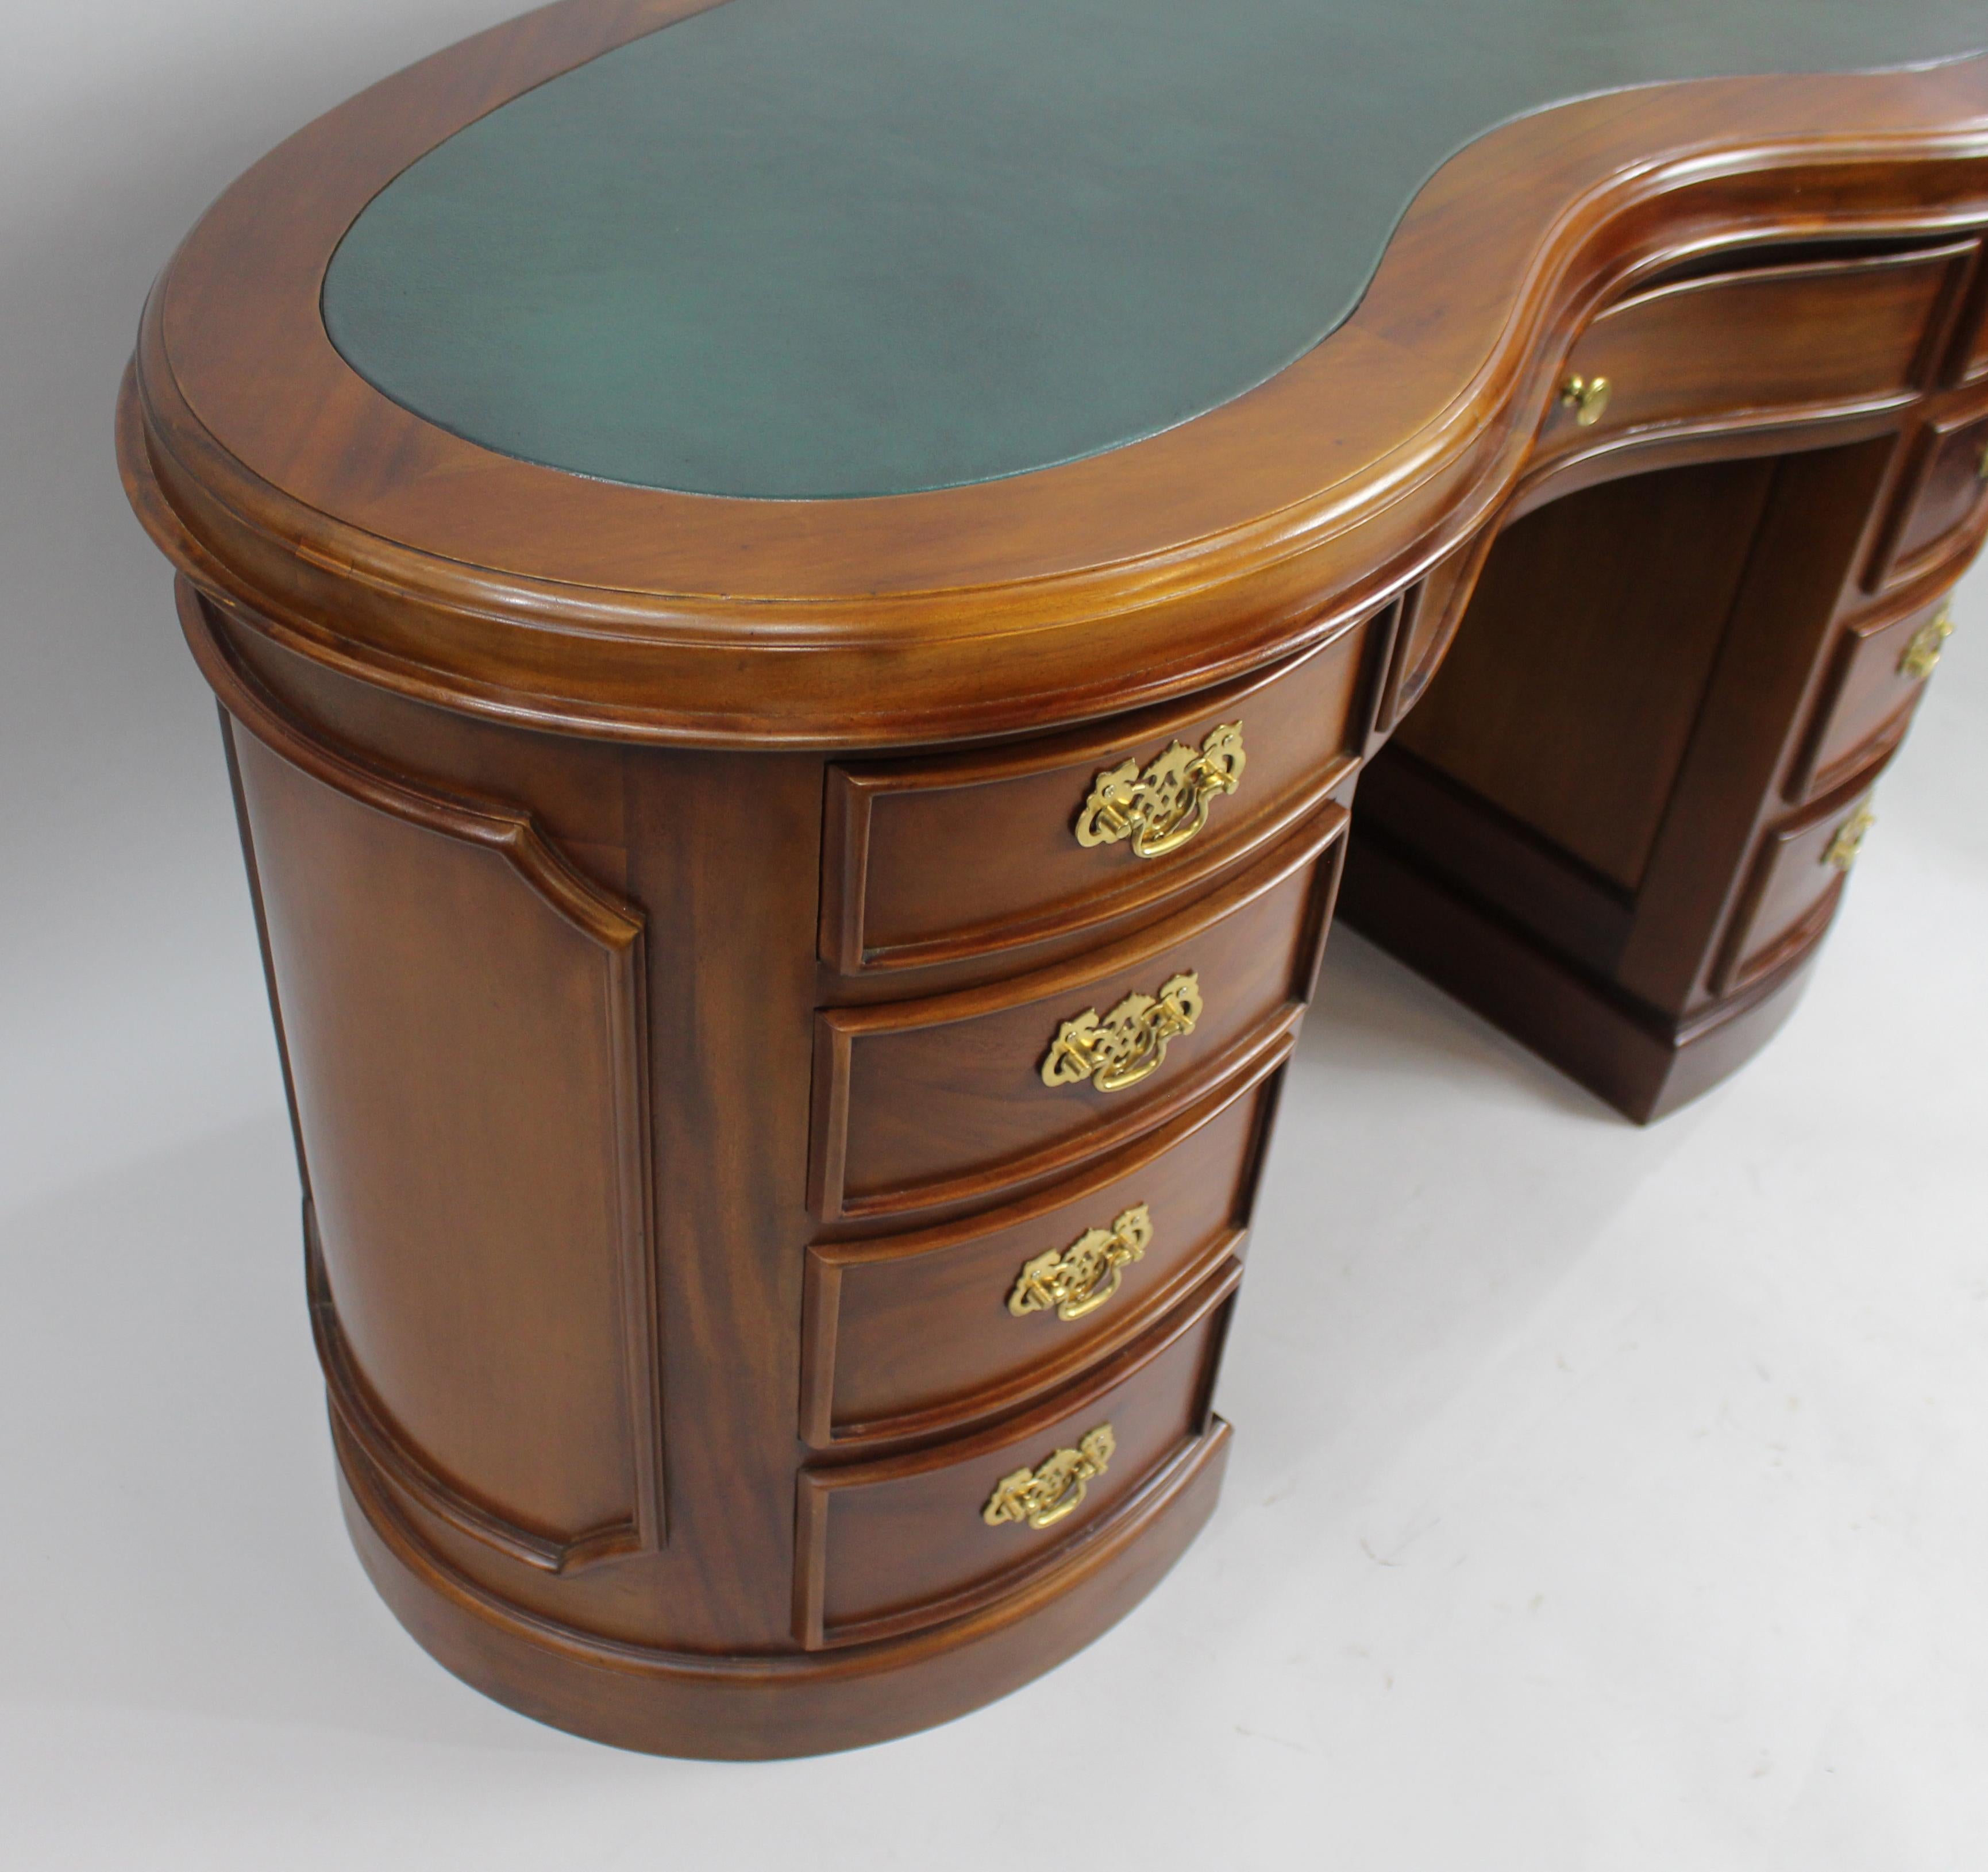 European Kidney Shaped Mahogany Leather Topped Desk For Sale